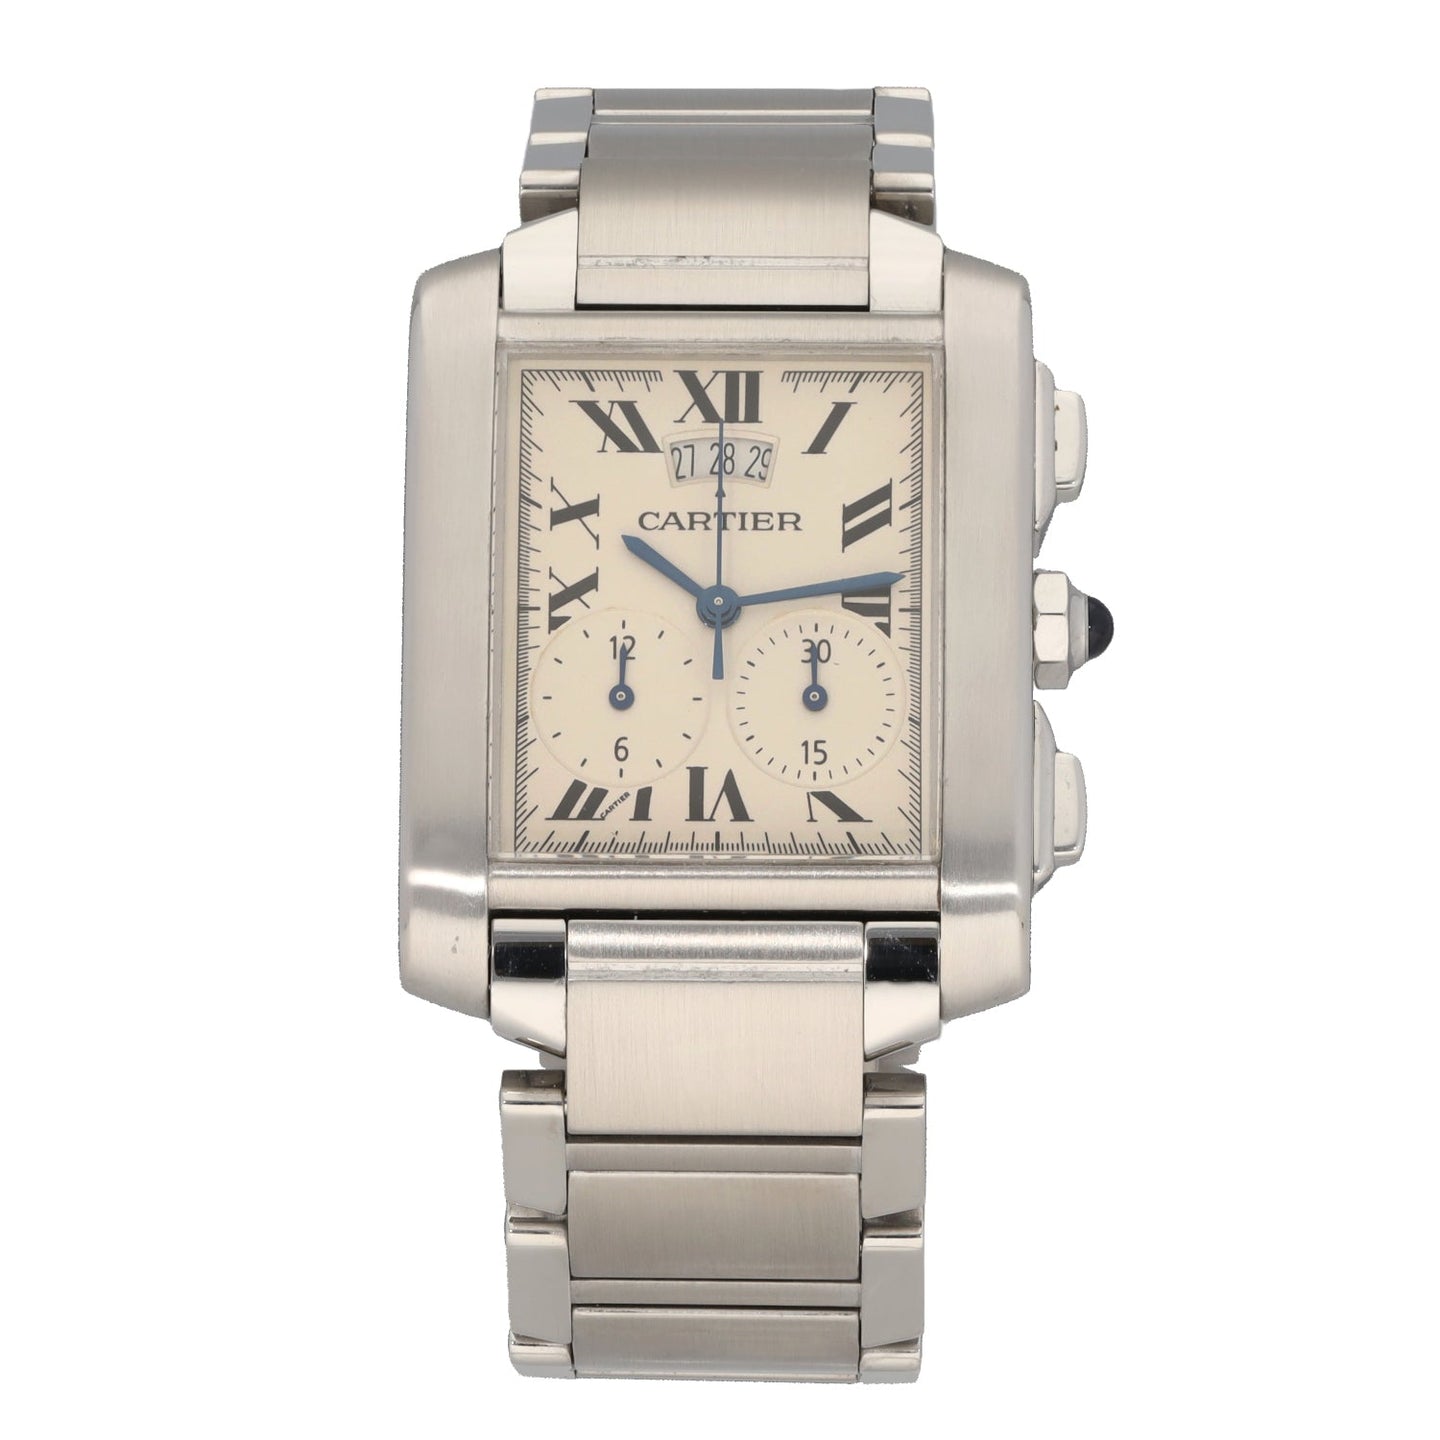 Cartier Tank Francaise W51024Q3 28mm Stainless Steel Watch